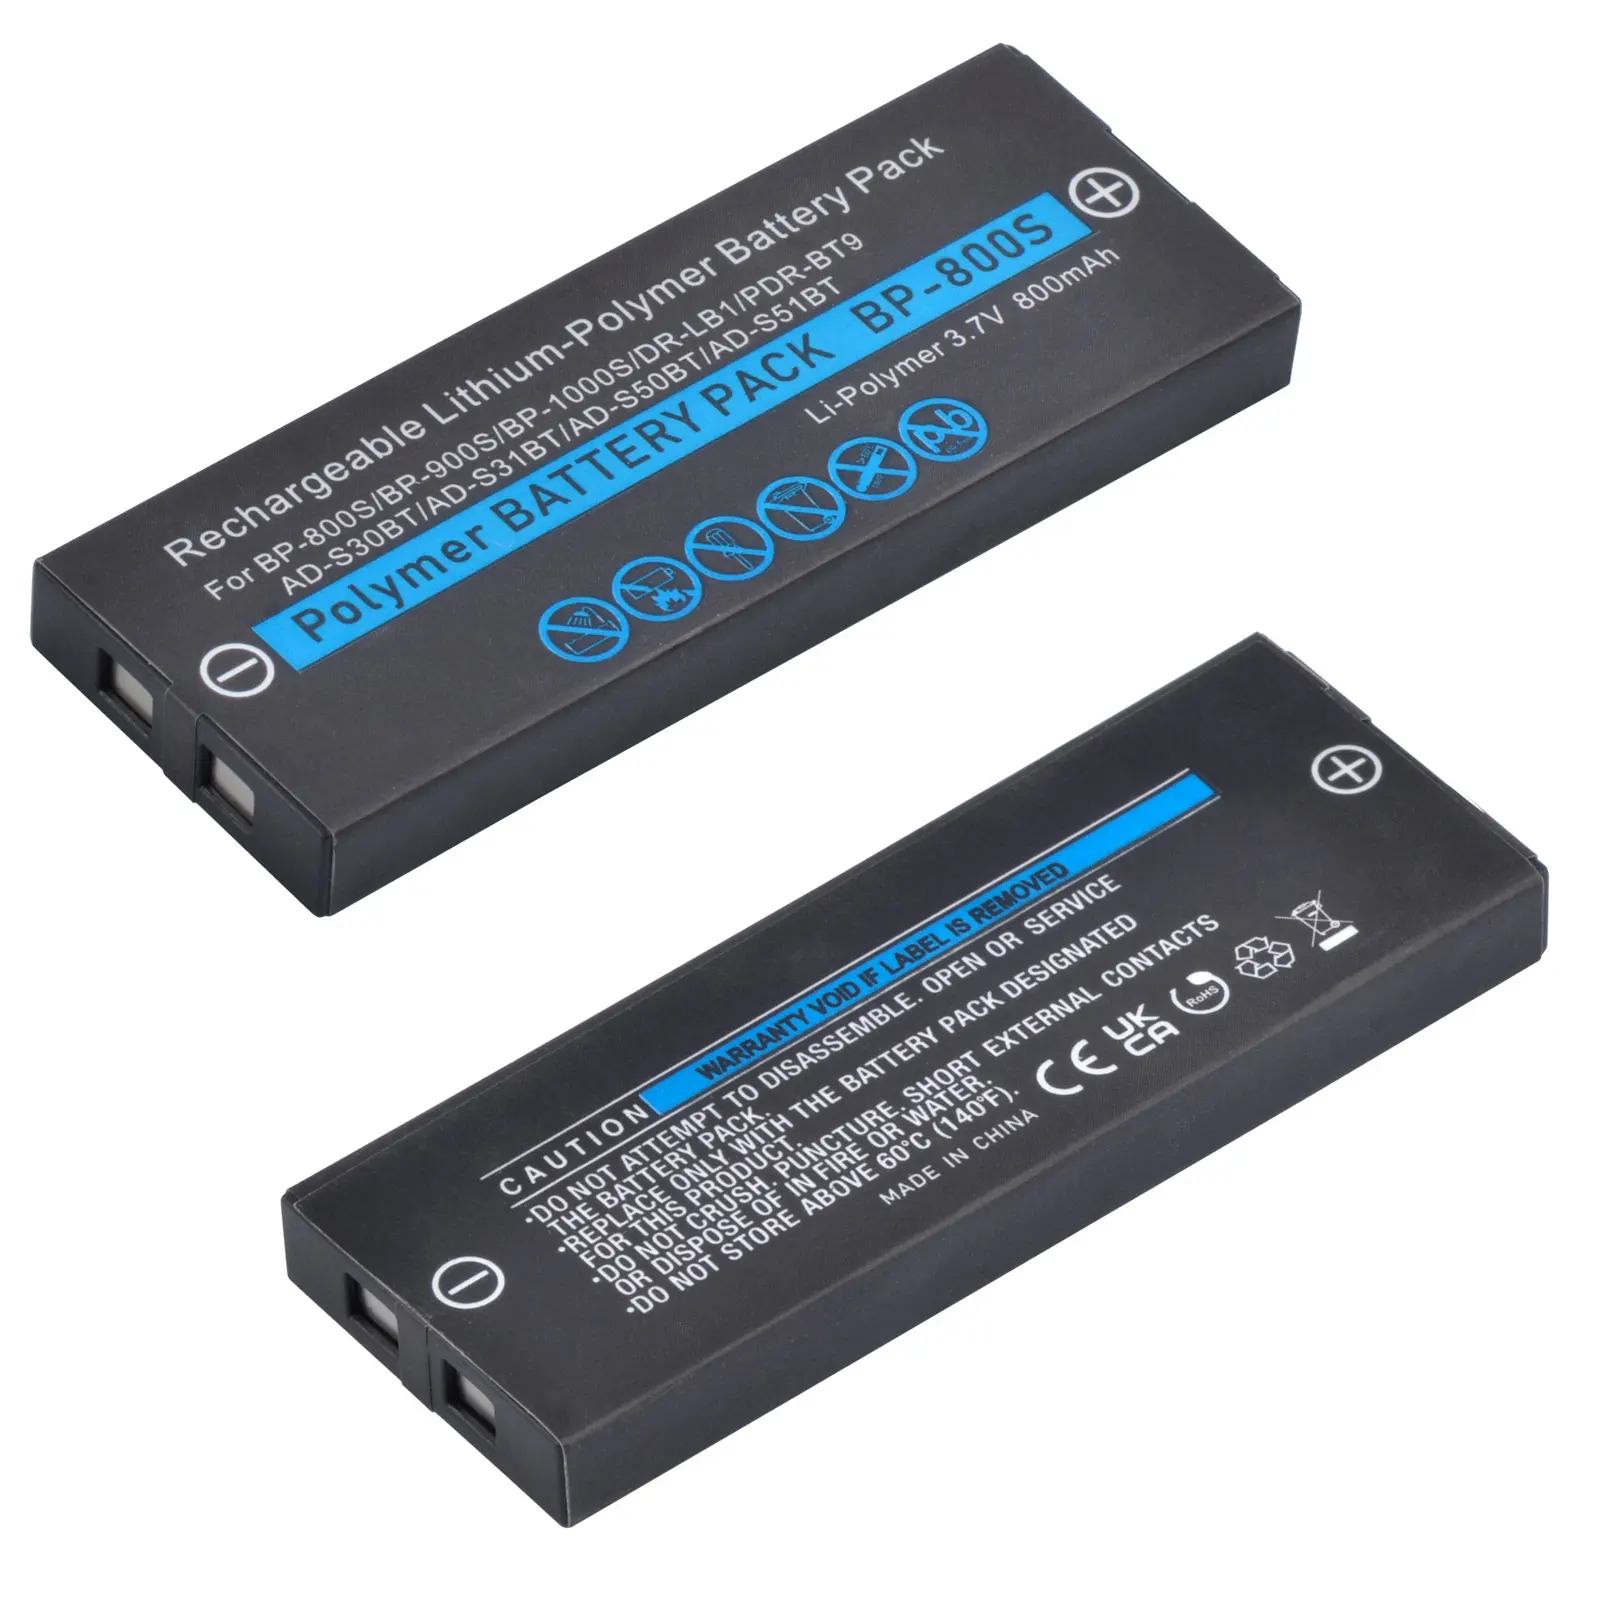 

BP-800S BP-900S BP-1000 Battery Compatible with Kyocera Yashica Finecam S3 S3R S3X S4 S5 S5R, Konica DR-LB1,Toshiba PDR-BT9